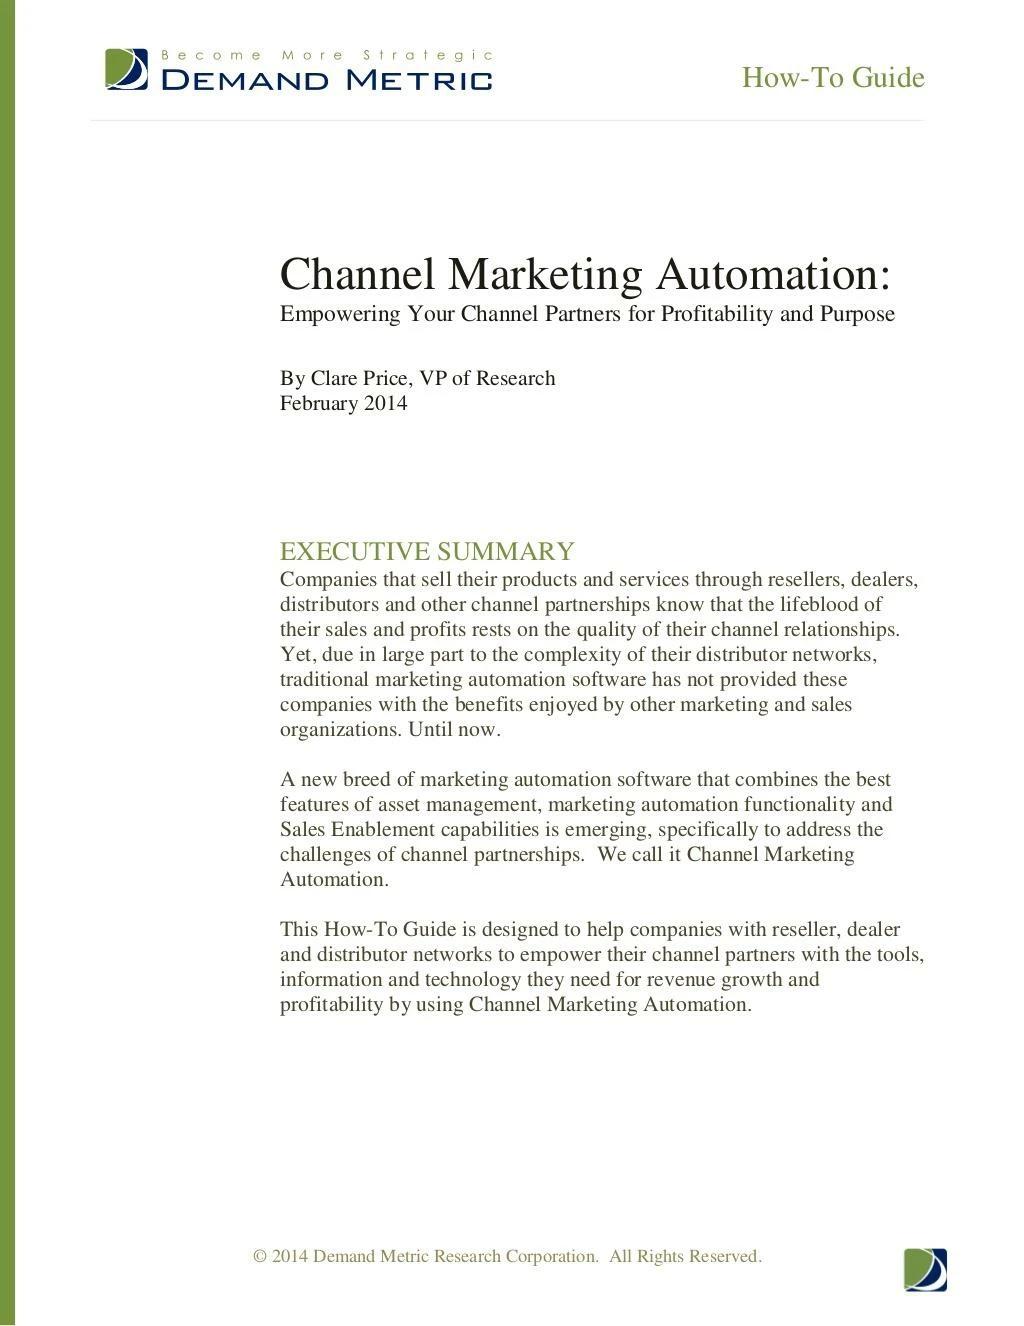 how to guide channel marketing automation